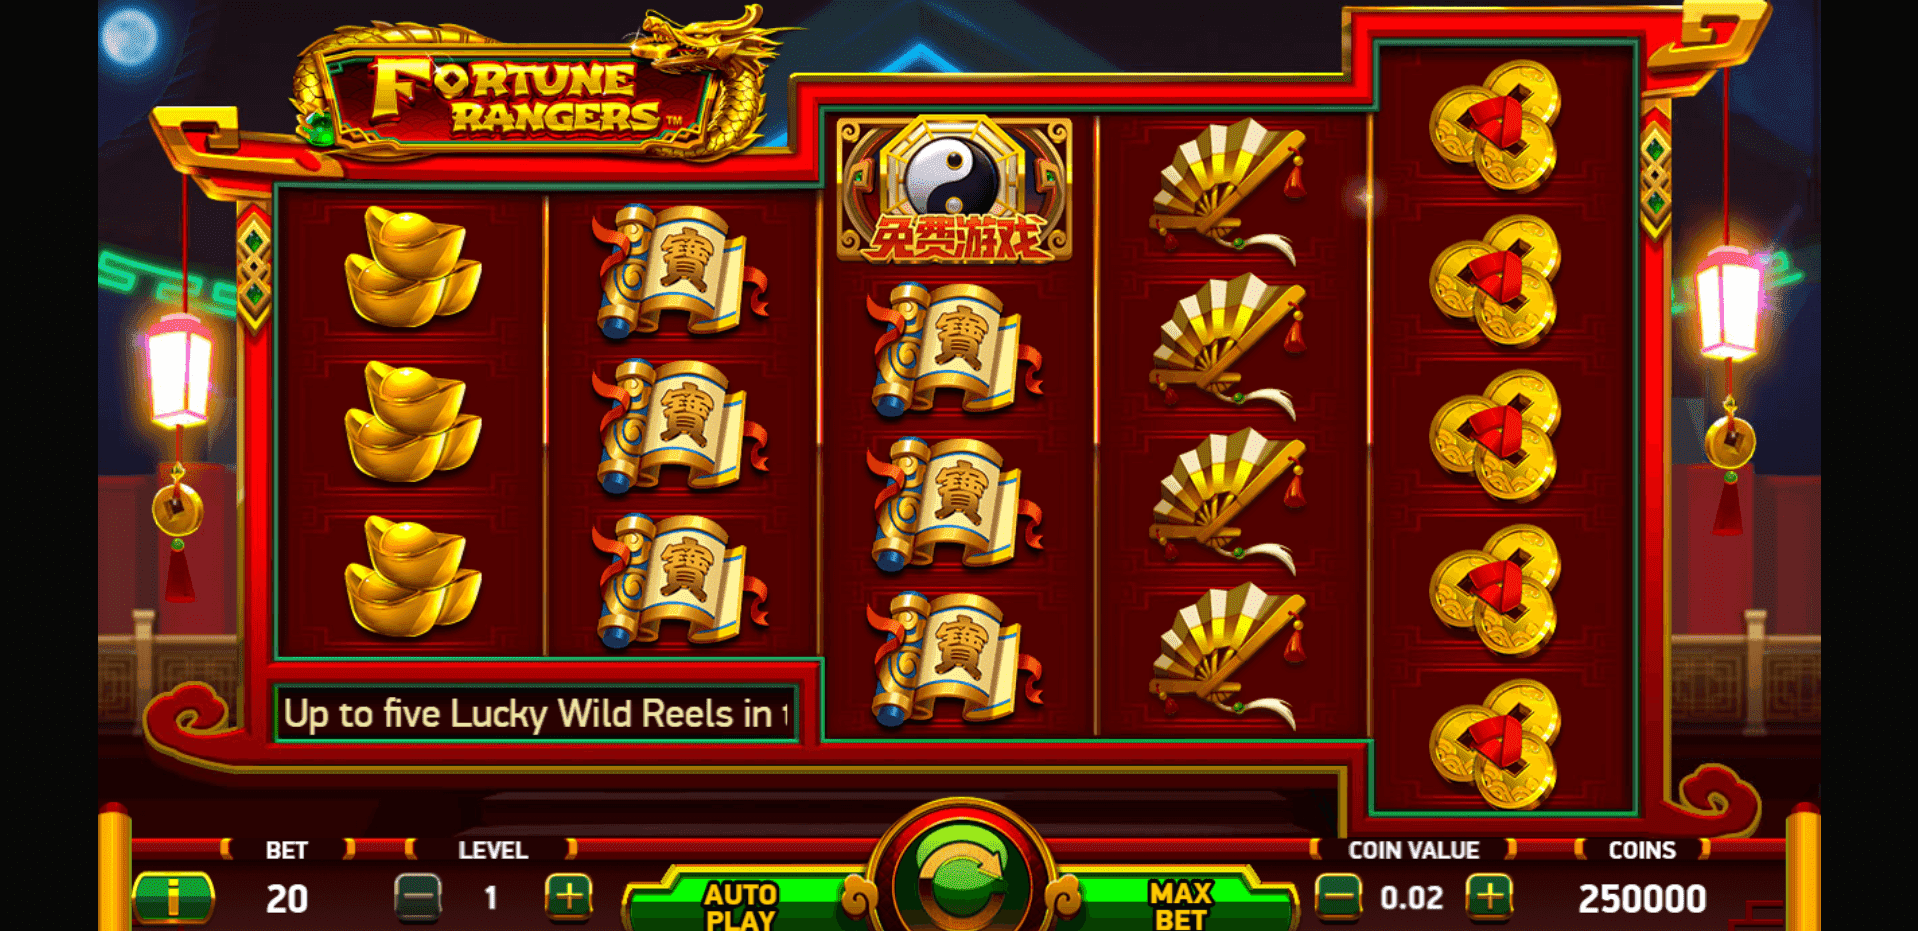 Fortune Rangers slot play free